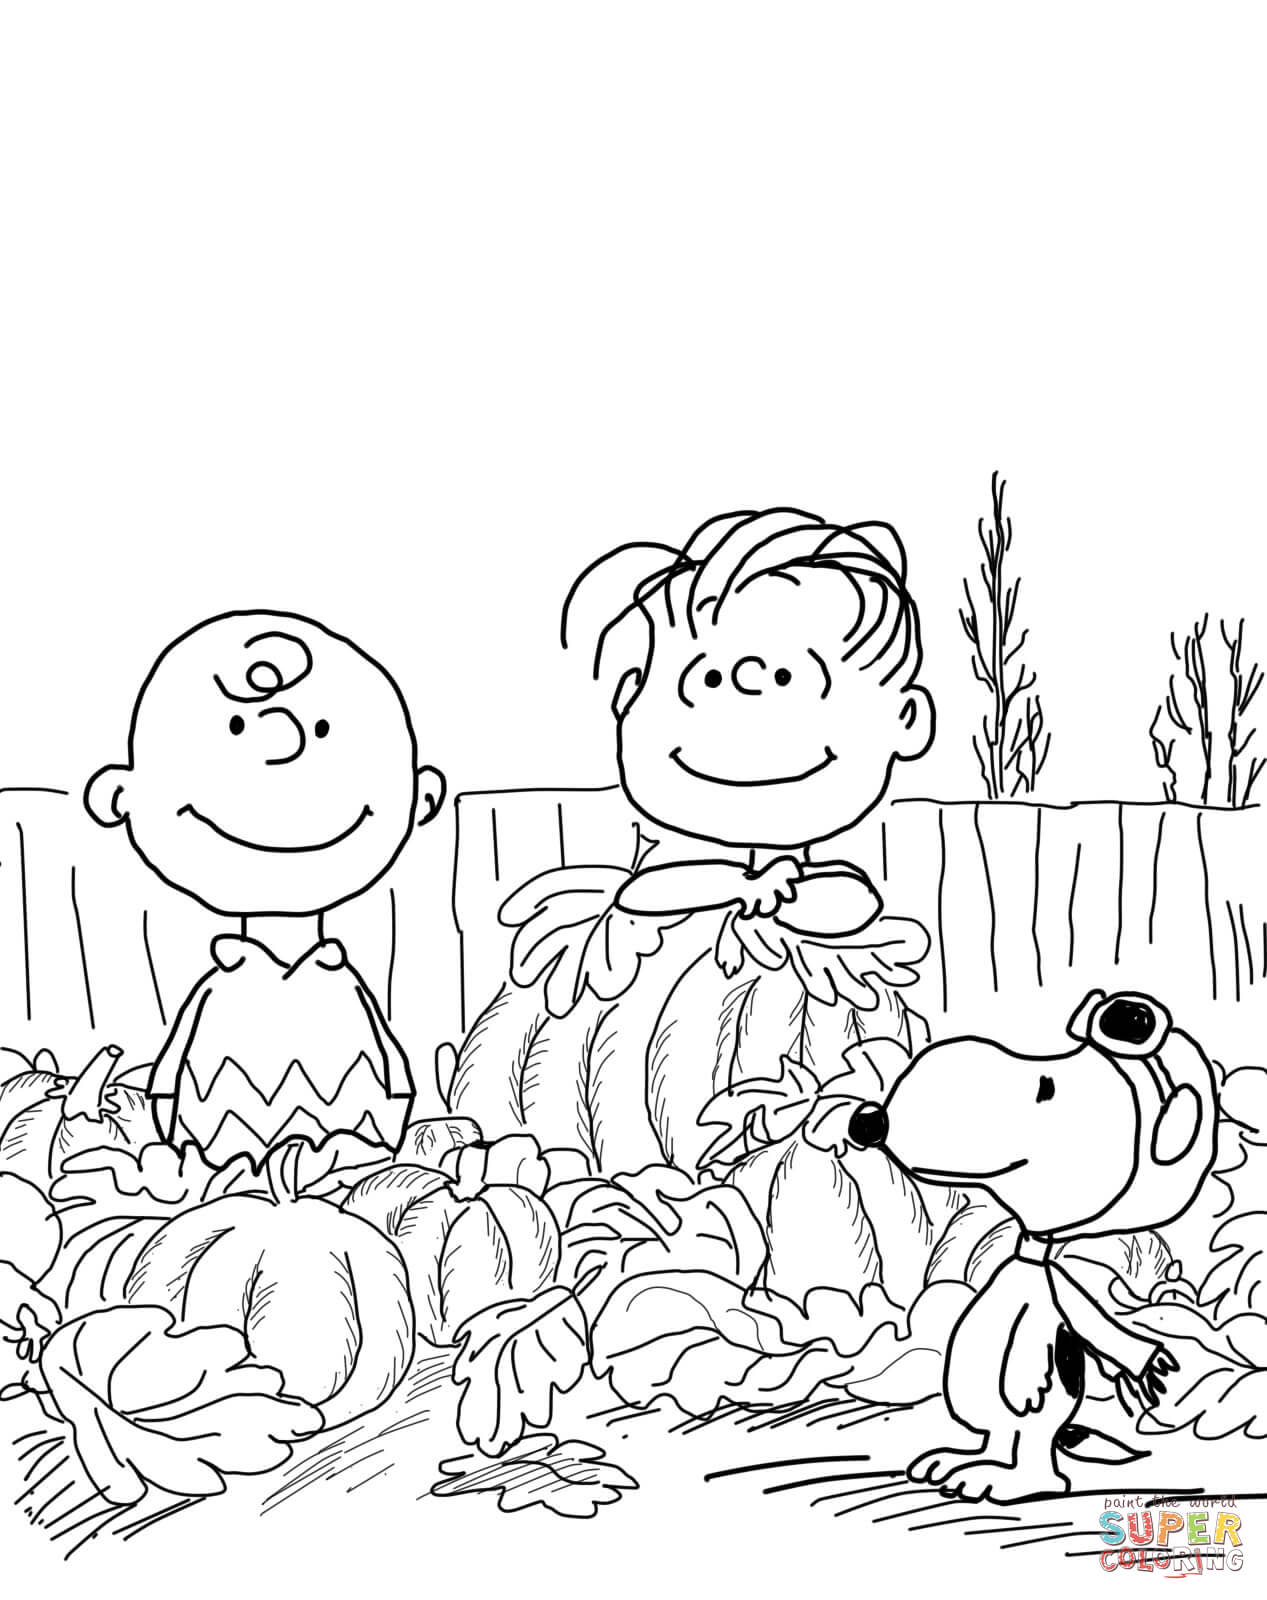 Great Pumpkin Charlie Brown Coloring Page | Free Printable Coloring - Free Printable Charlie Brown Halloween Coloring Pages